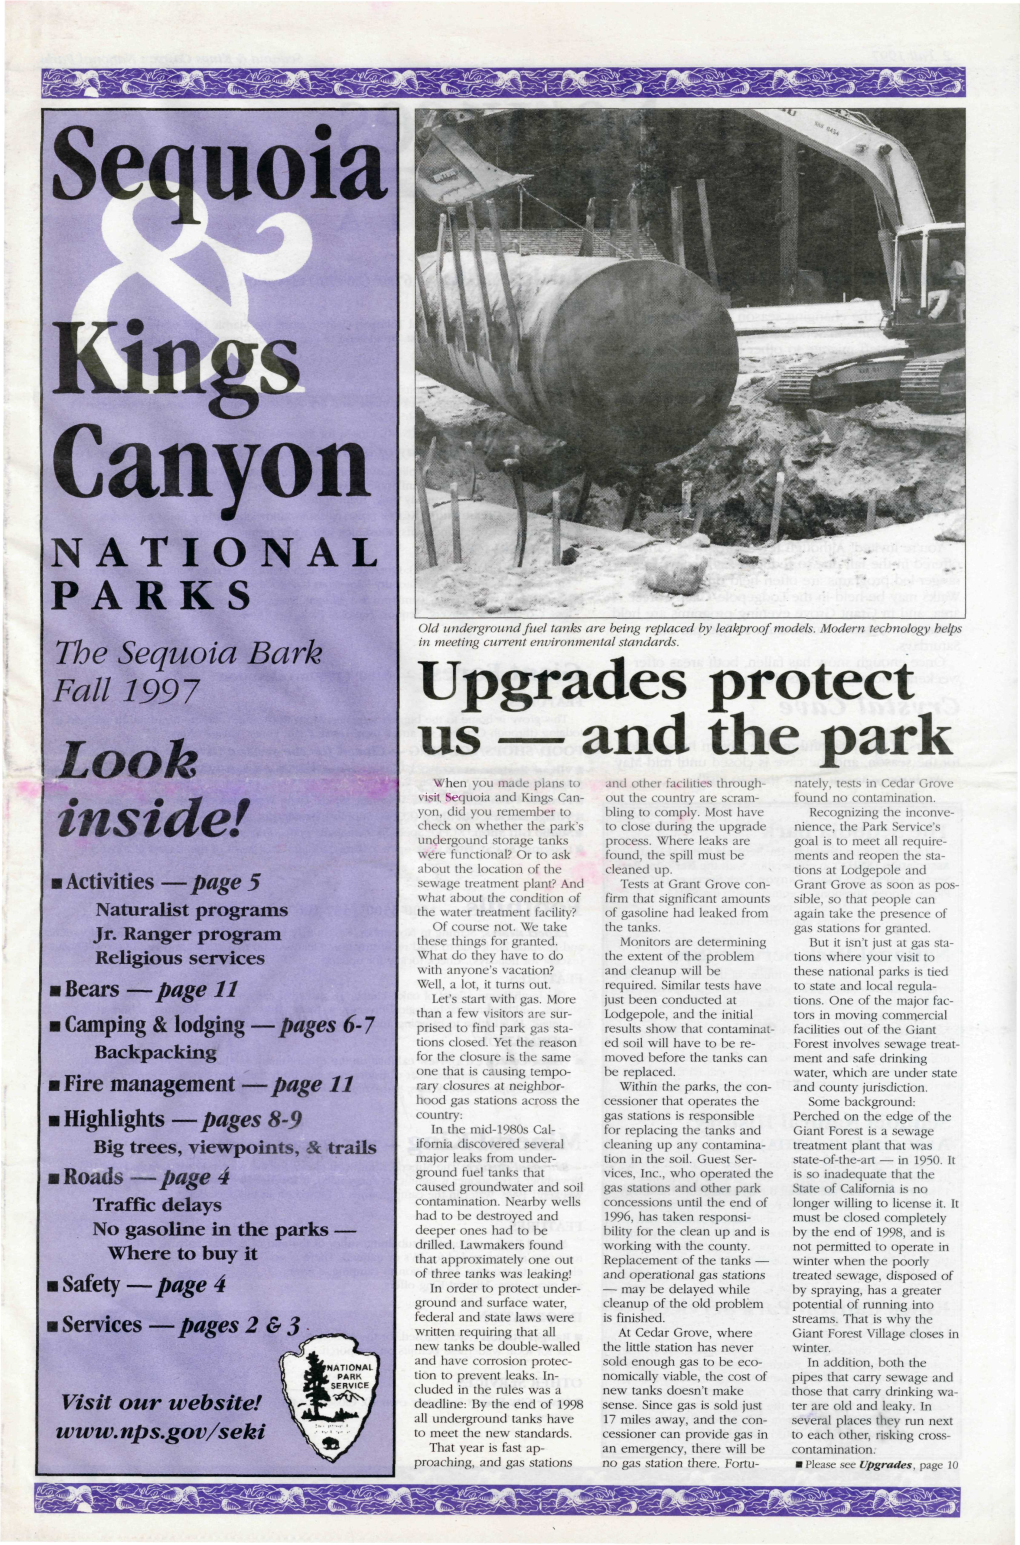 Kings Canyon NATIONAL PARKS Old Underground Fuel Tanks Are Being Replaced by Leakproof Models